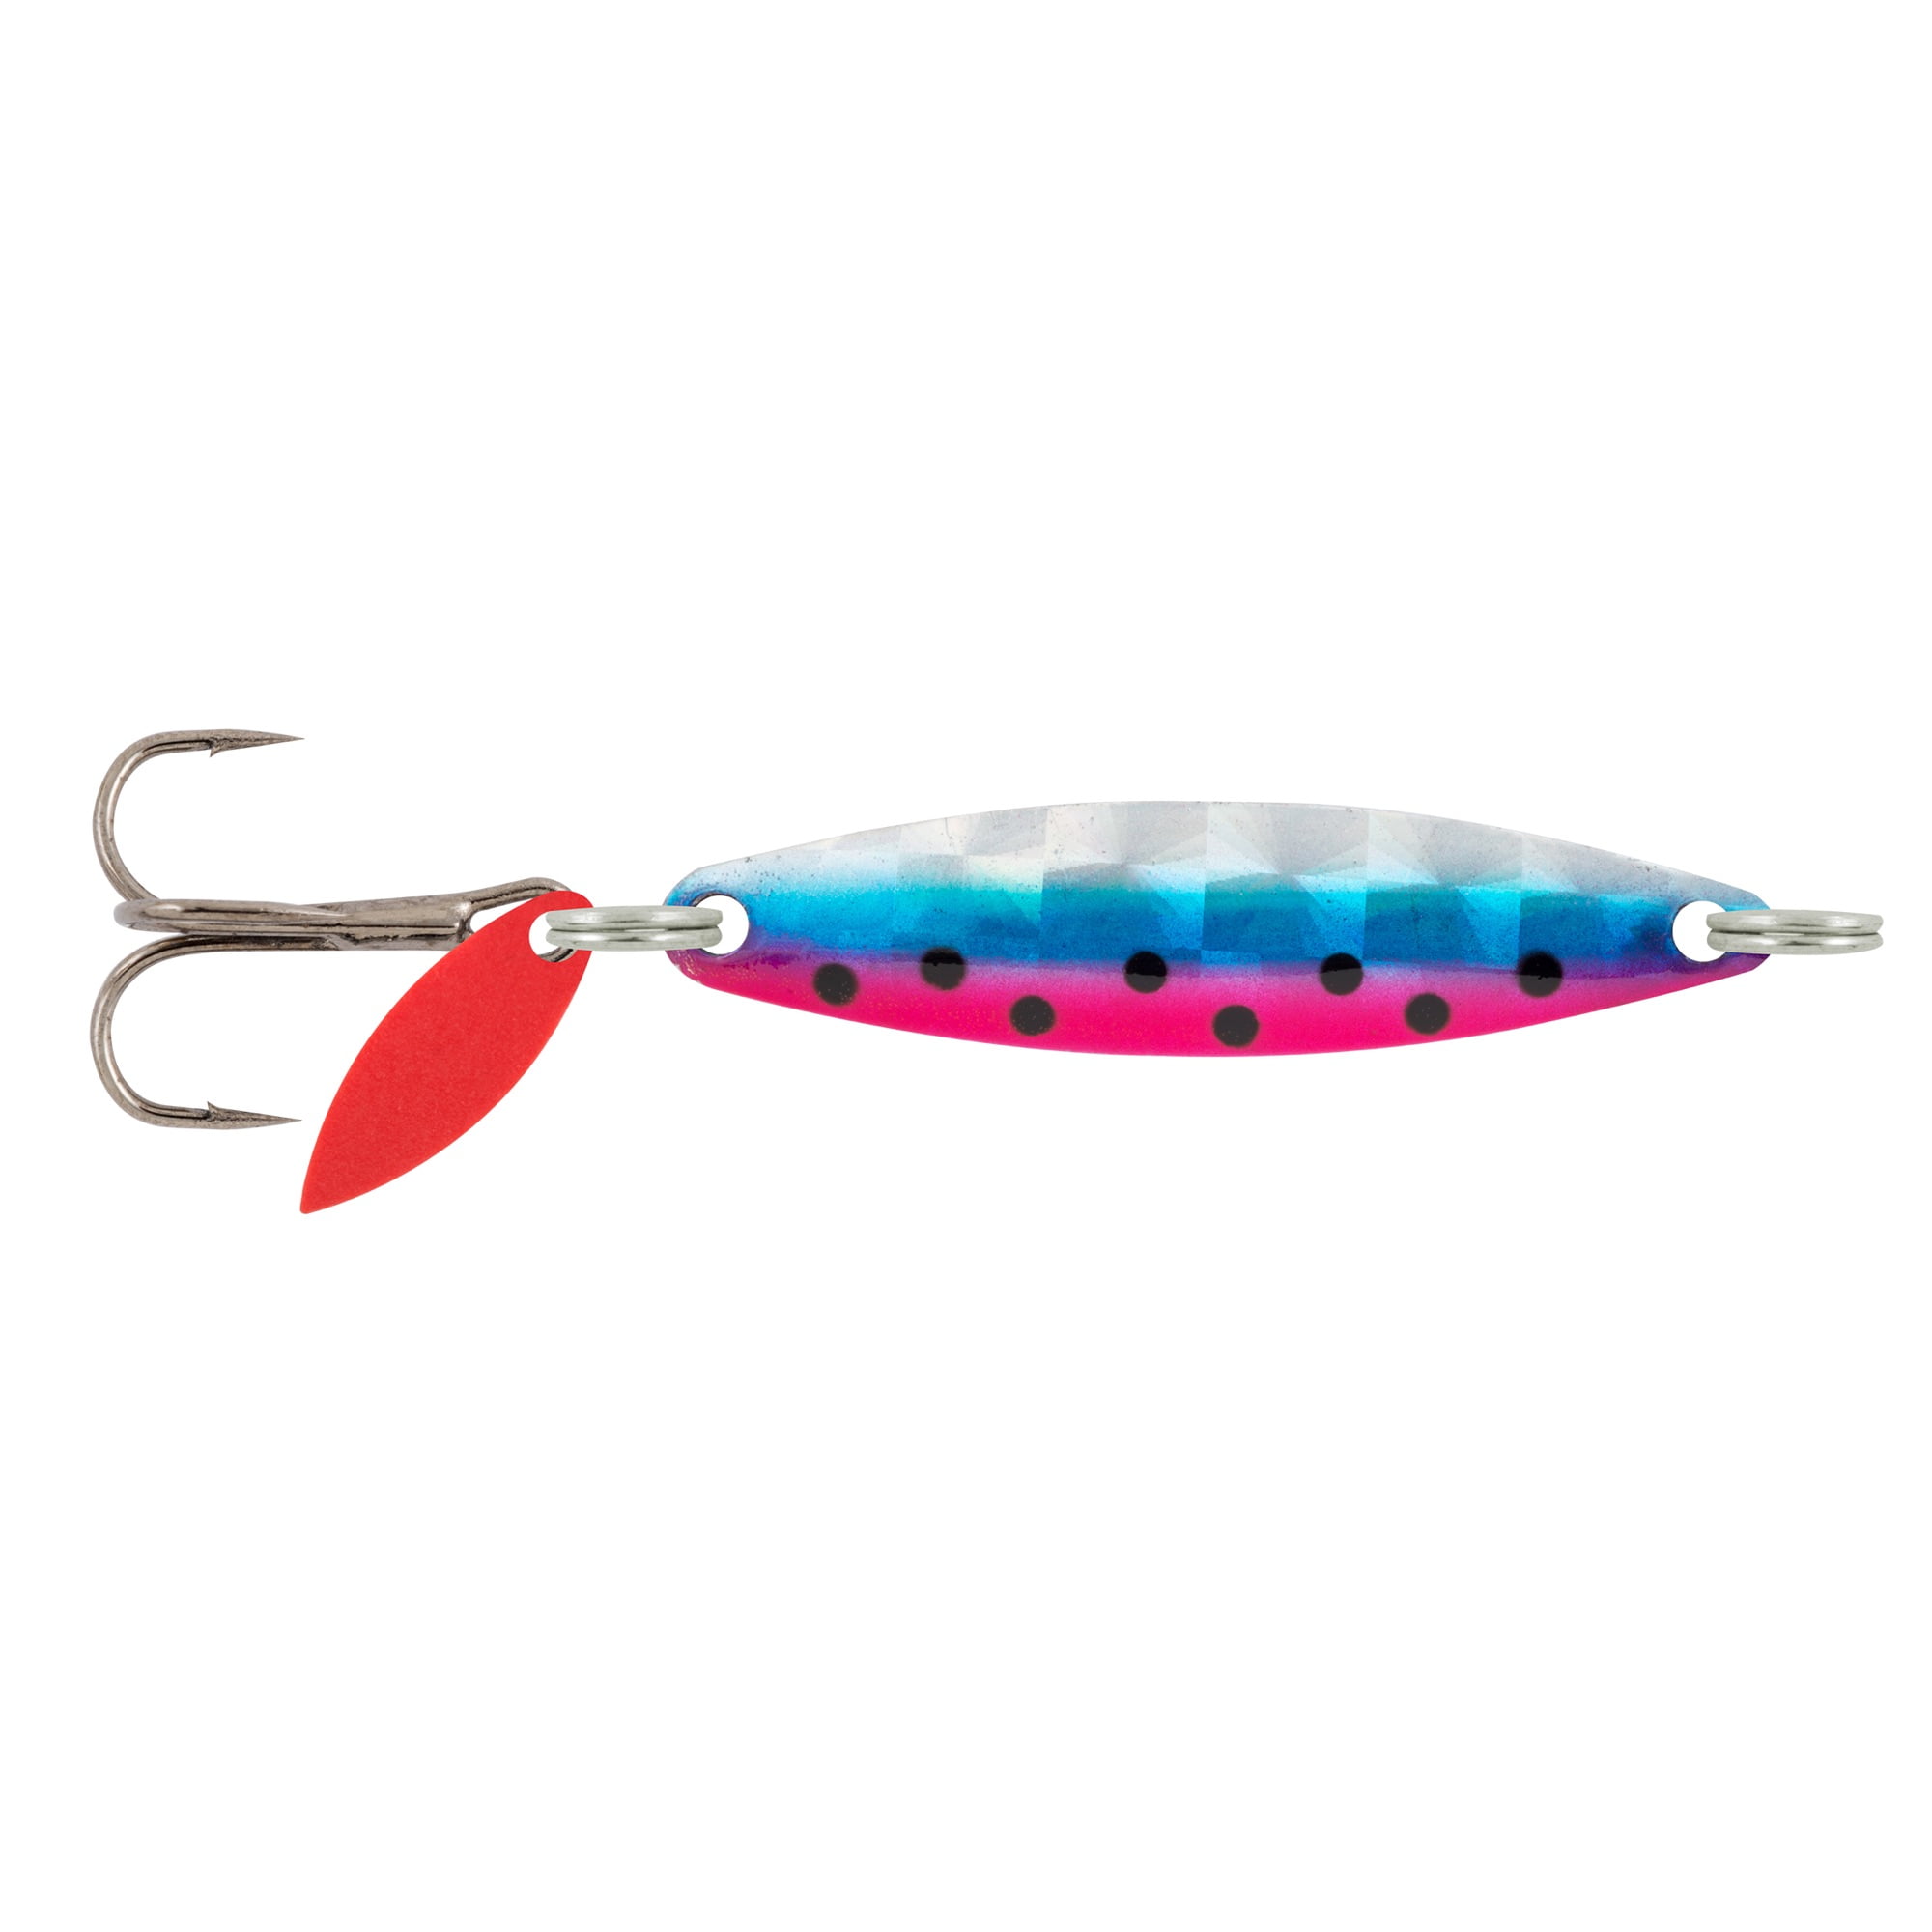 Spoon Lures For Pike